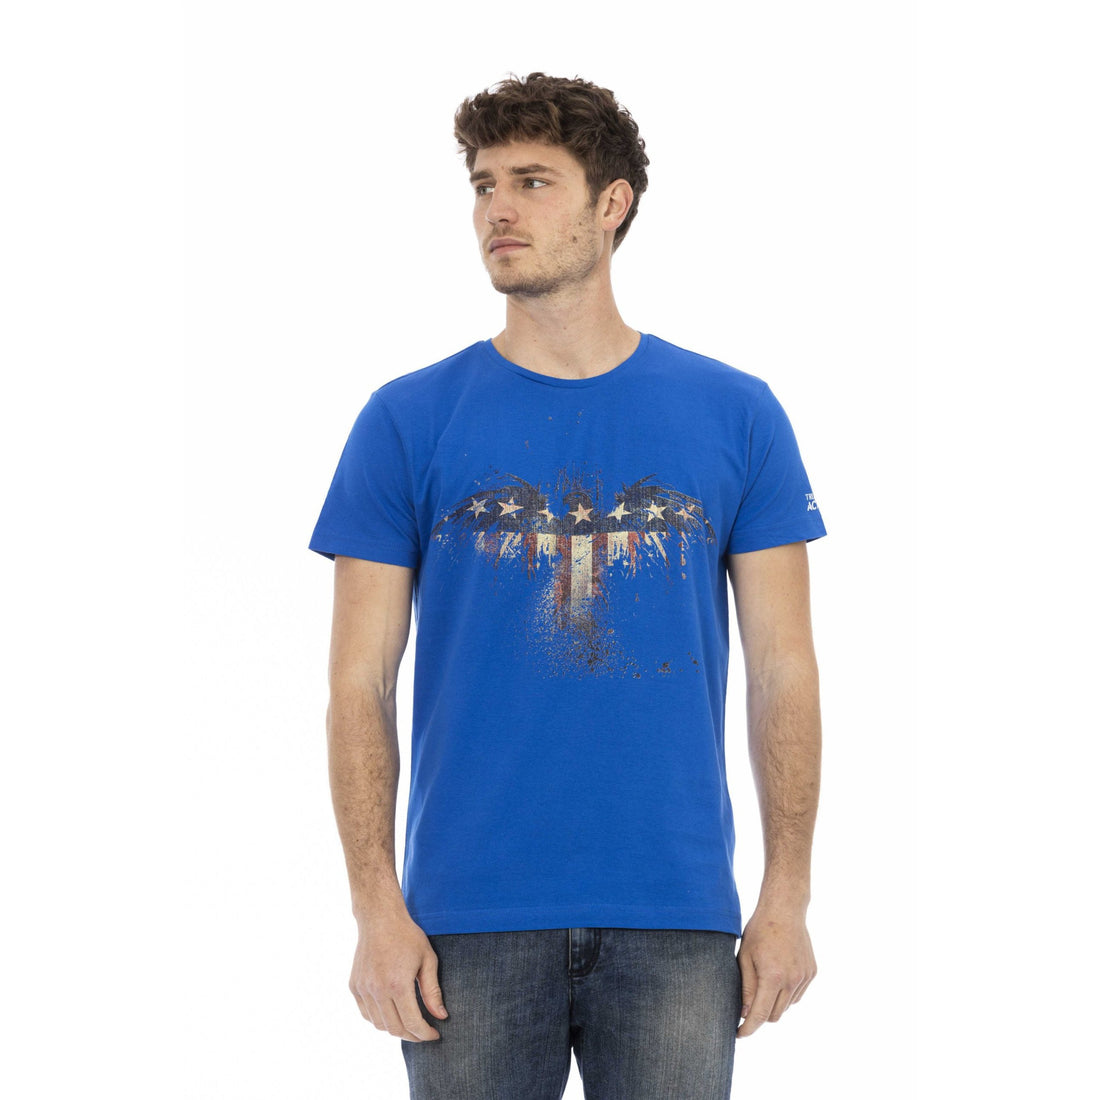 Trussardi Action Chic Blue Short Sleeve T-Shirt with Print